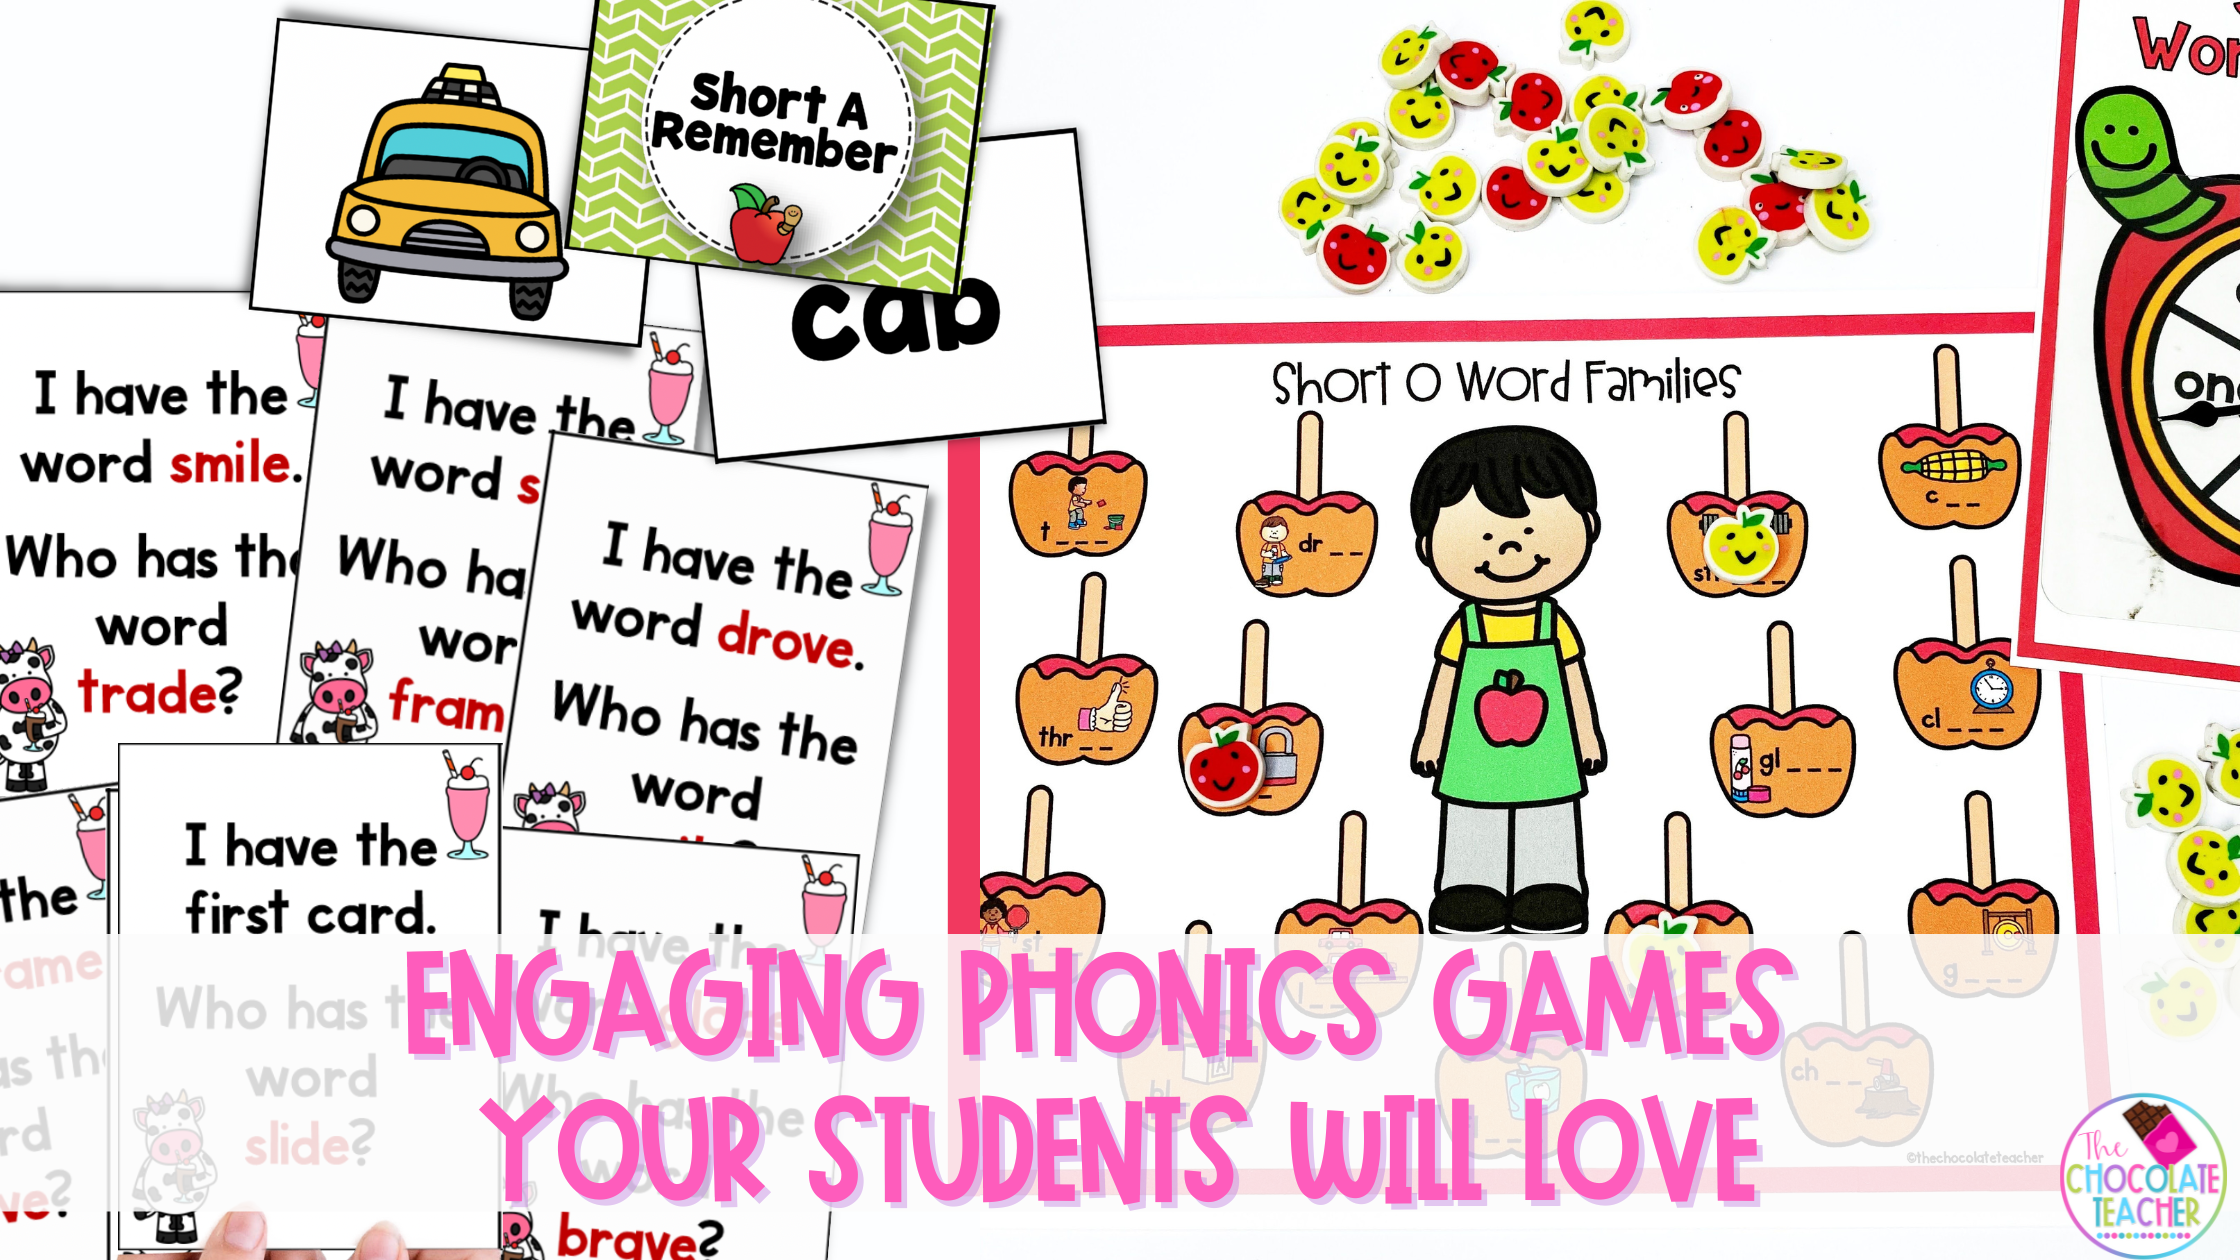 Use these engaging phonics games in your classroom this year for fun learning your students will love.